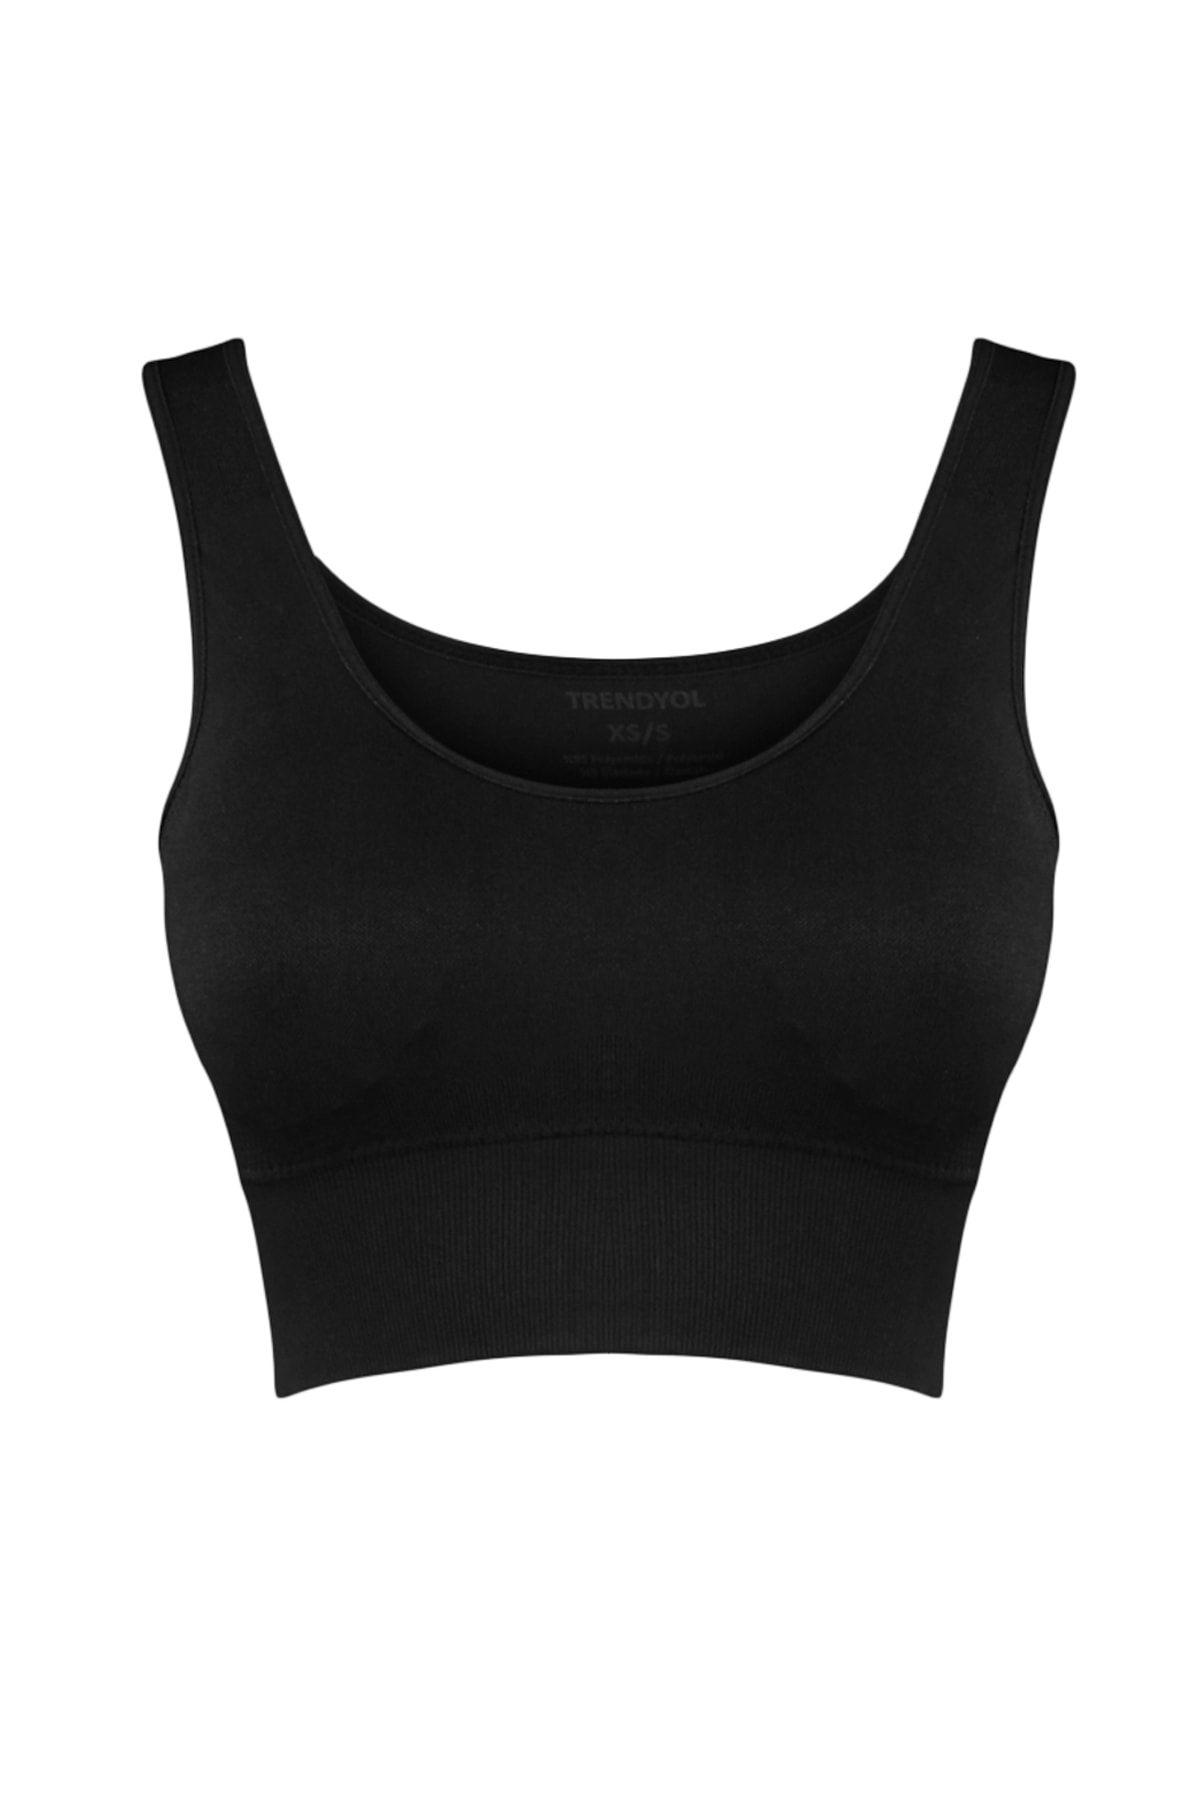 Trendyol Collection Black Seamless/Seamless Supported/Shaping Knitted Sports  Bra TWOAW23SS00019 - Trendyol